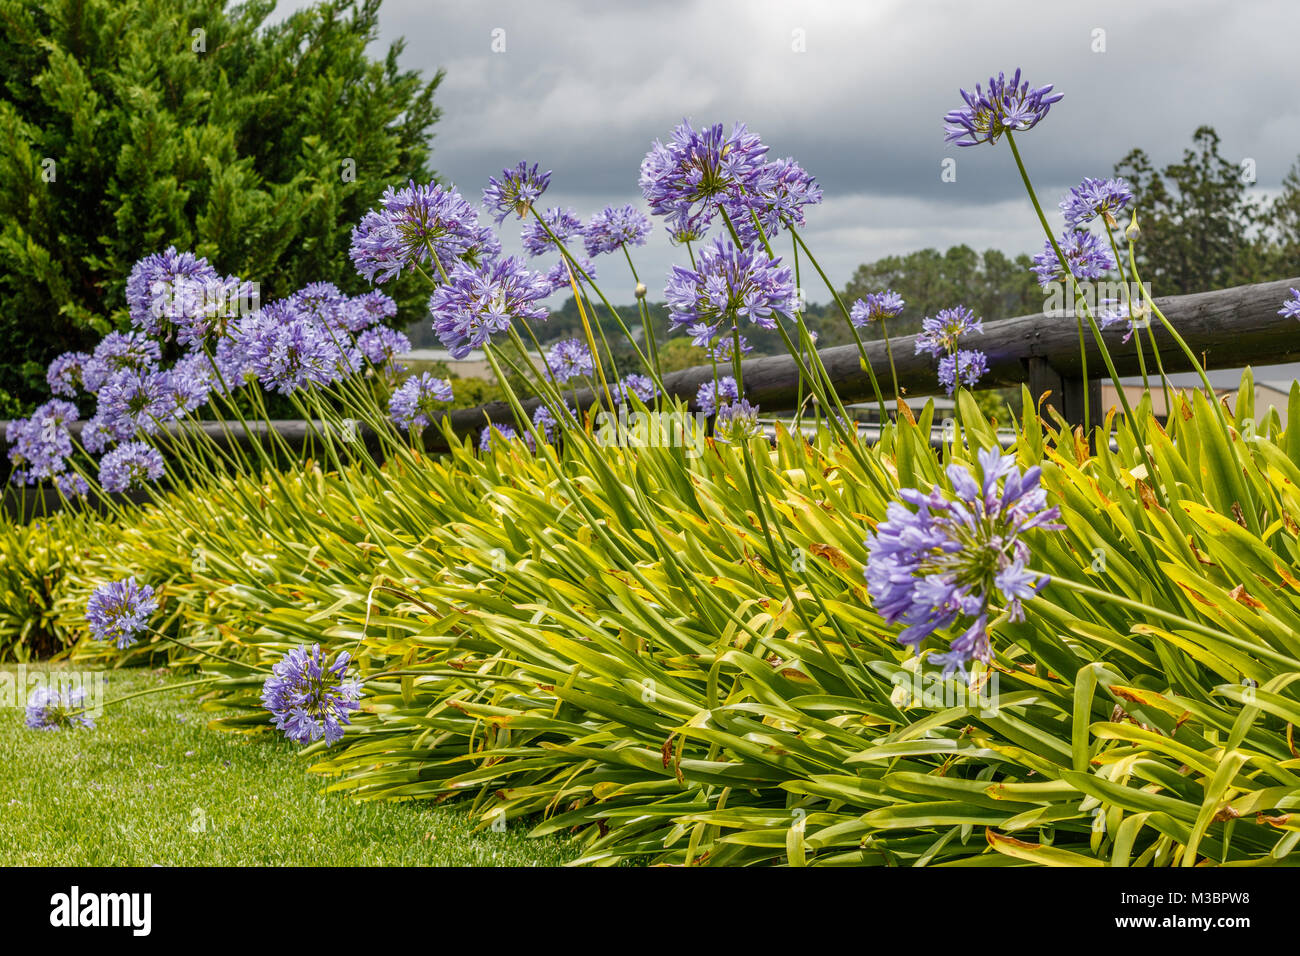 Blooming Agapanthus, ou Lily of the Nile. Le Queensland, Australie. Banque D'Images